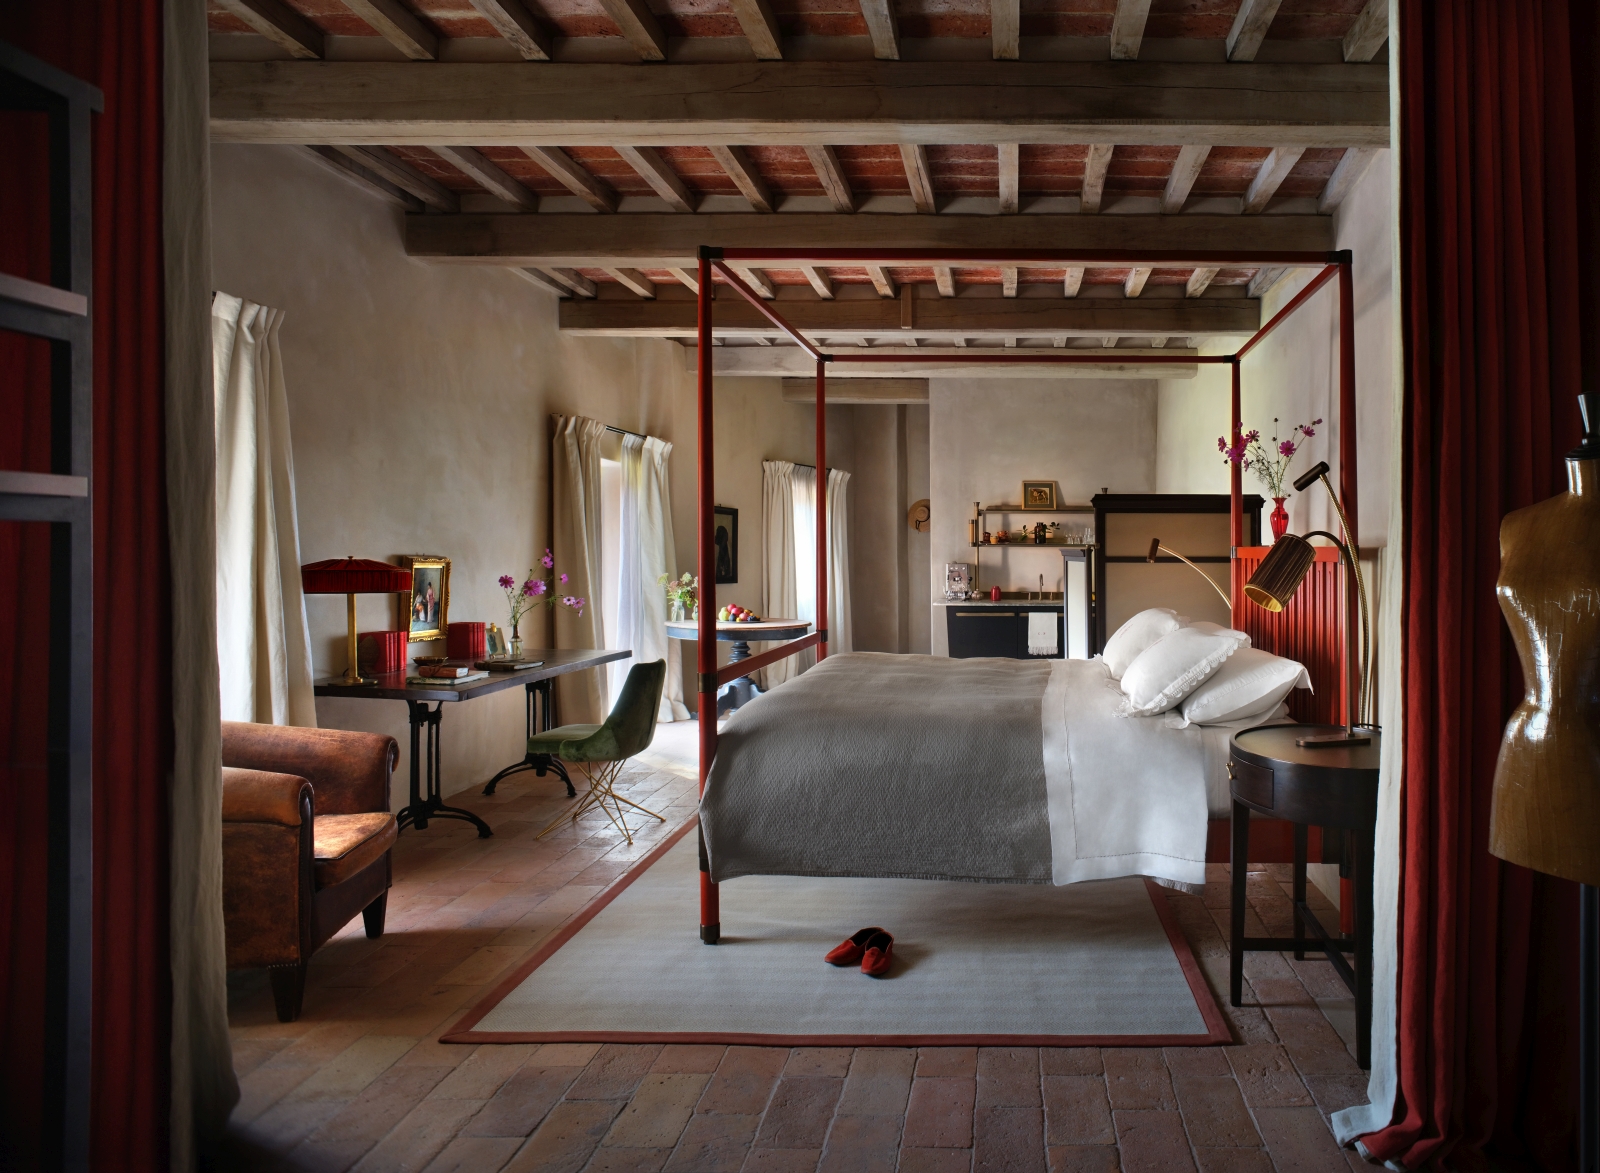 Rustic bedroom at luxury hotel Castello di Reschio in Umbria, Italy with four poster bed, desk, a walk-in closet and three large floor-to-ceiling windows